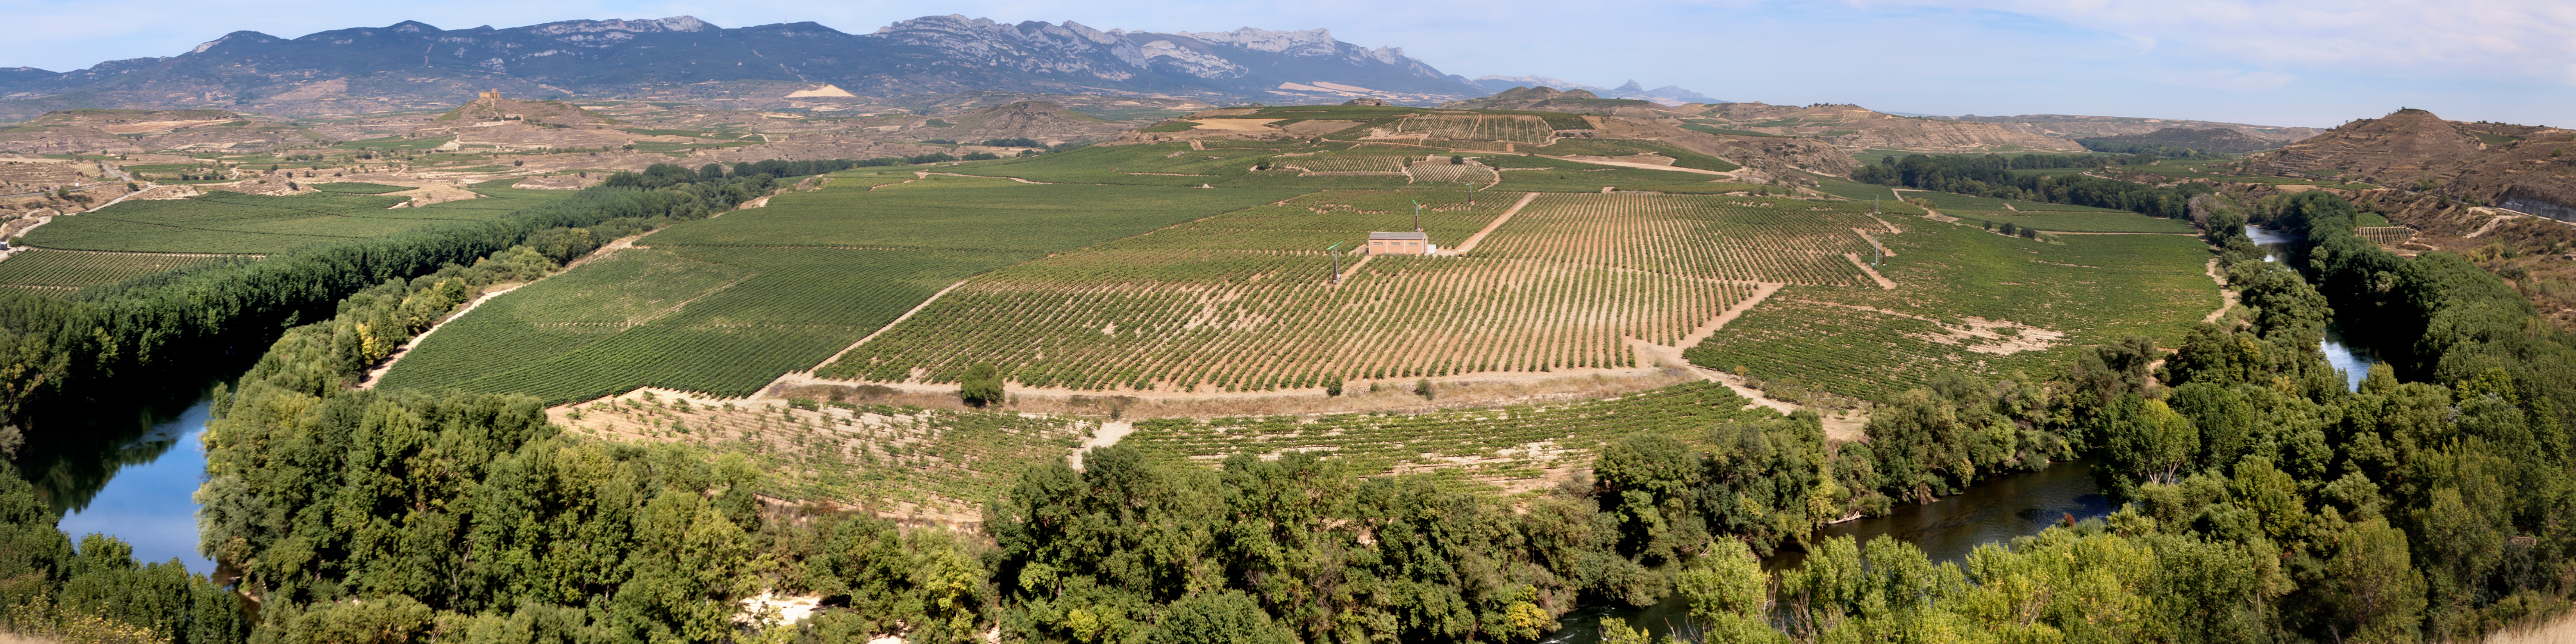 All about Rioja